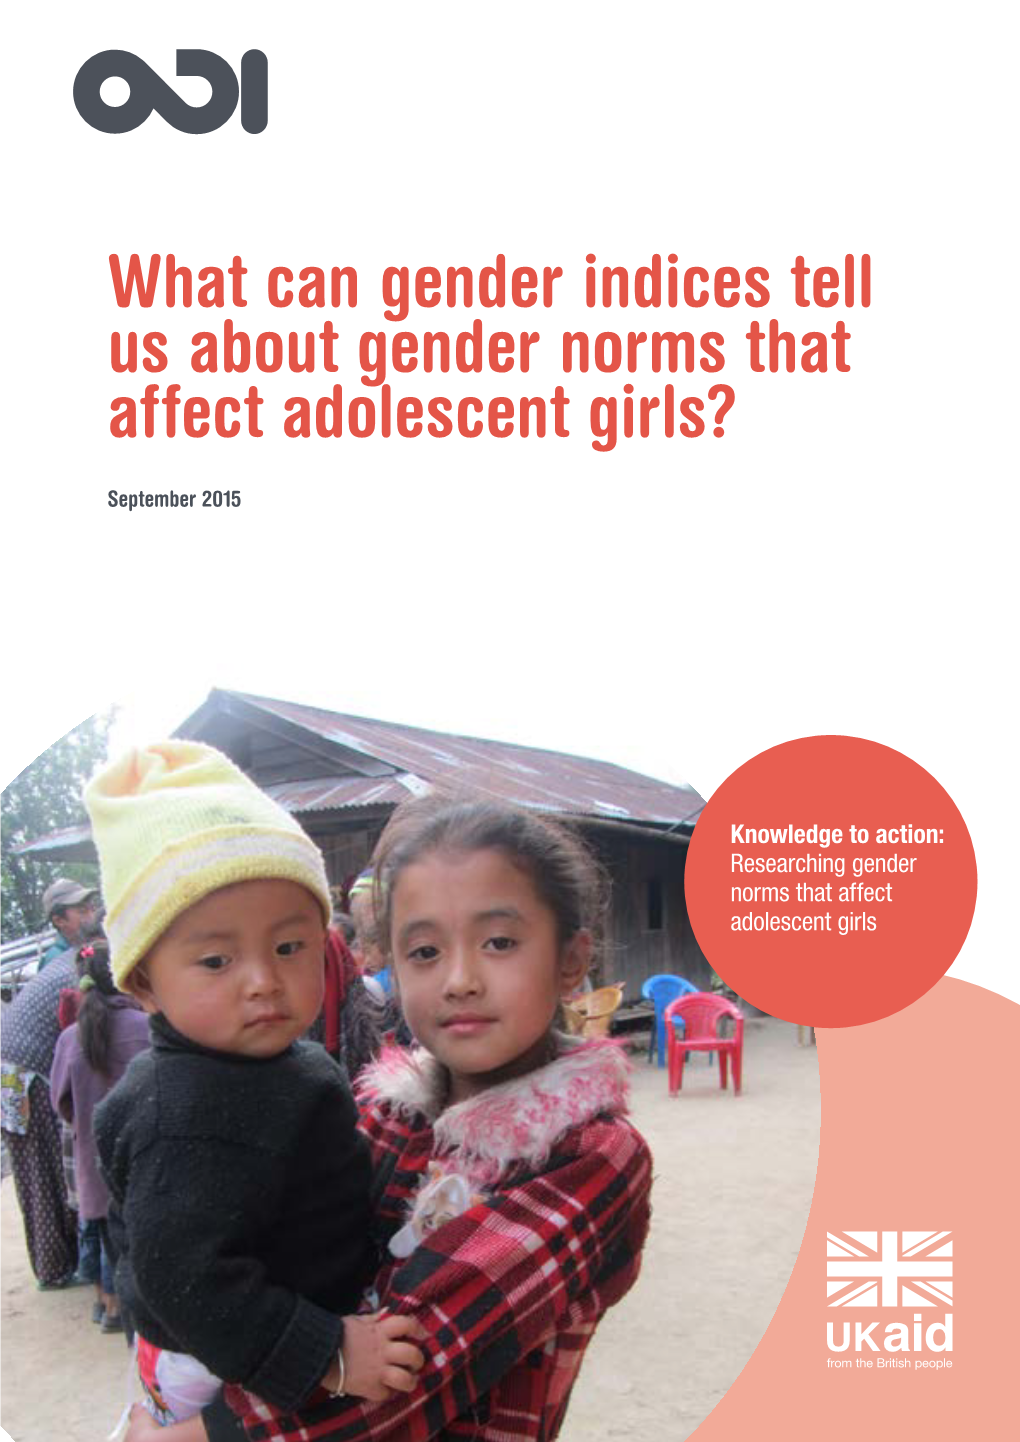 What Can Gender Indices Tell Us About Gender Norms That Affect Adolescent Girls?